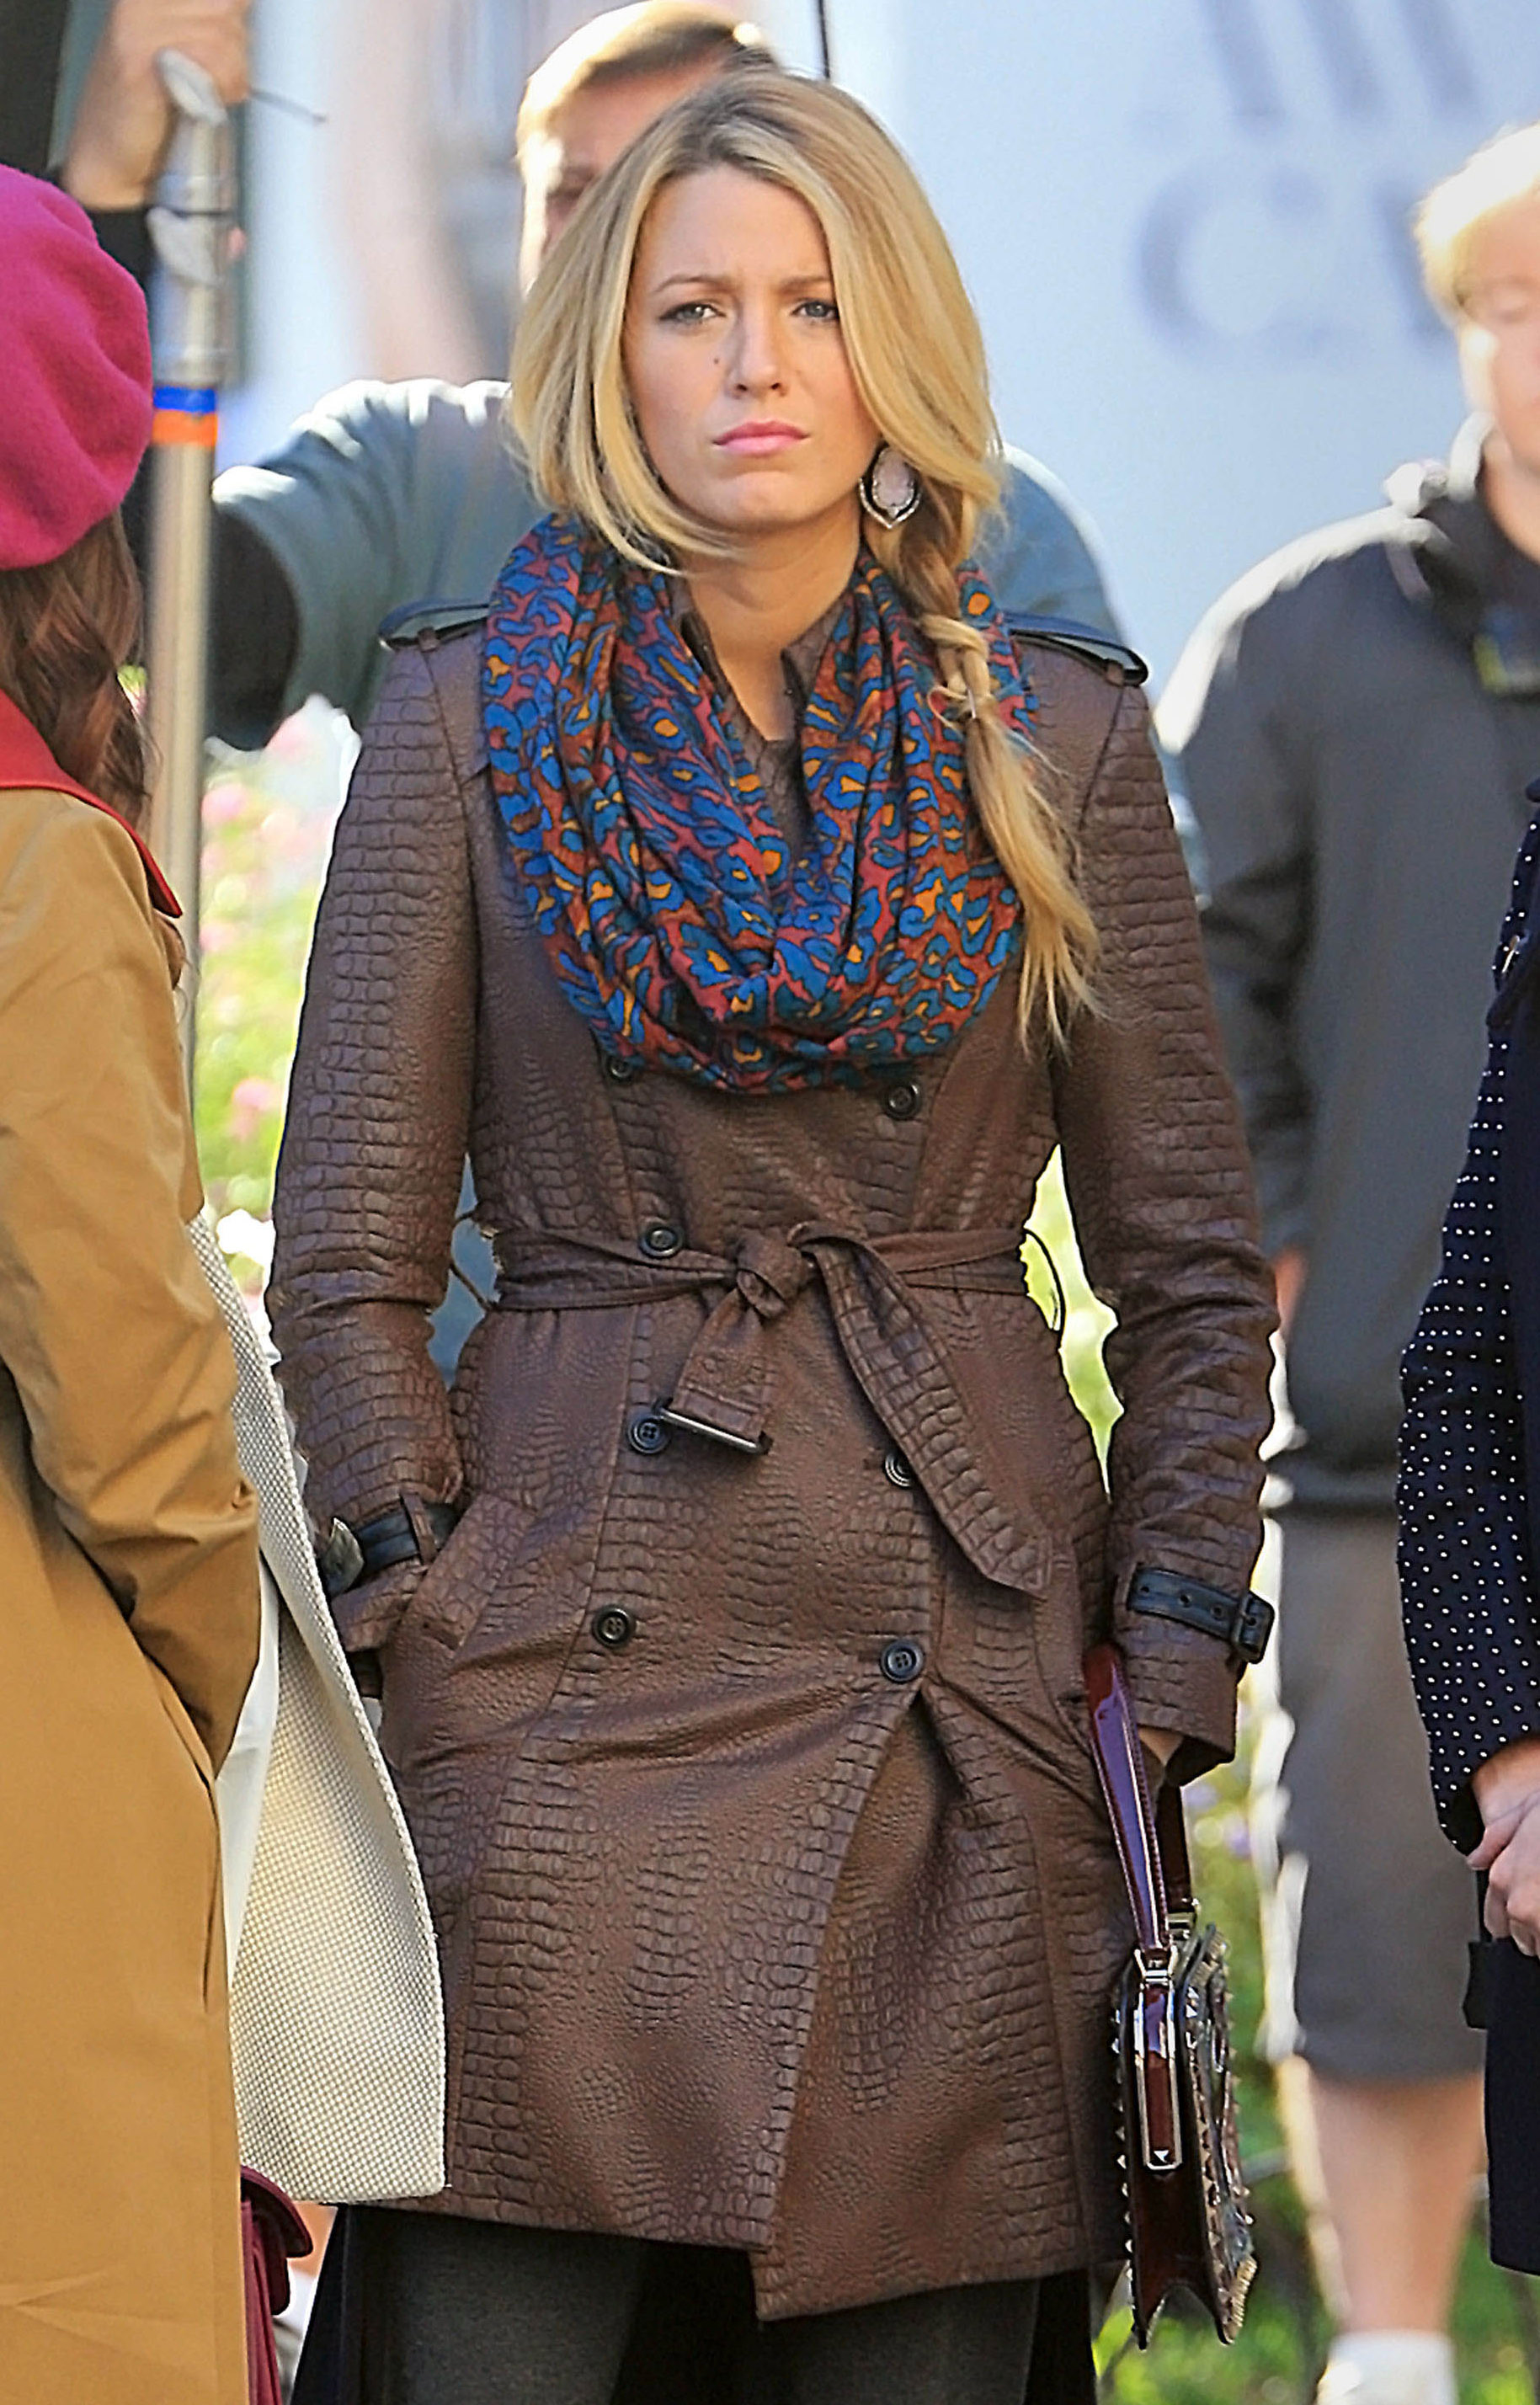 Blake Lively as seen on the set of "Gossip Girl" on October 1, 2012 in New York City | Source: Getty Images